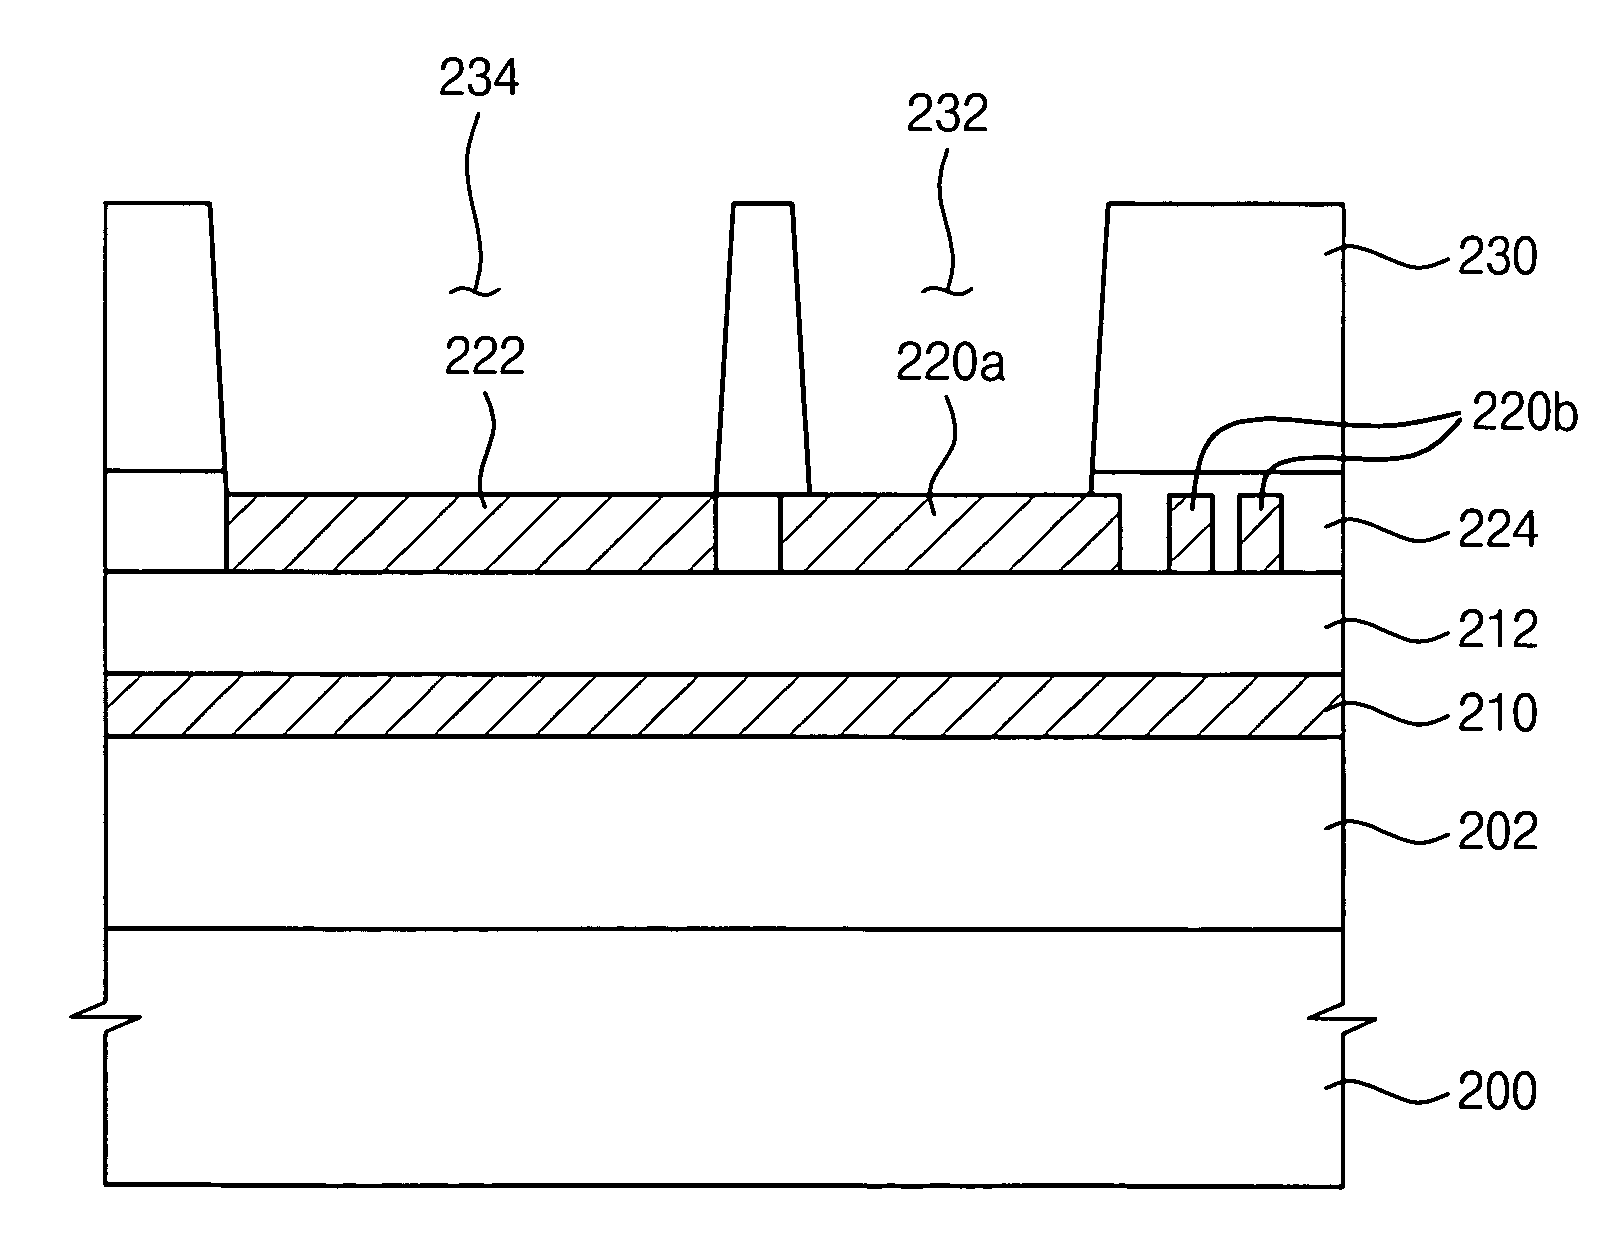 Alignment key structure in a semiconductor device and method of forming the same